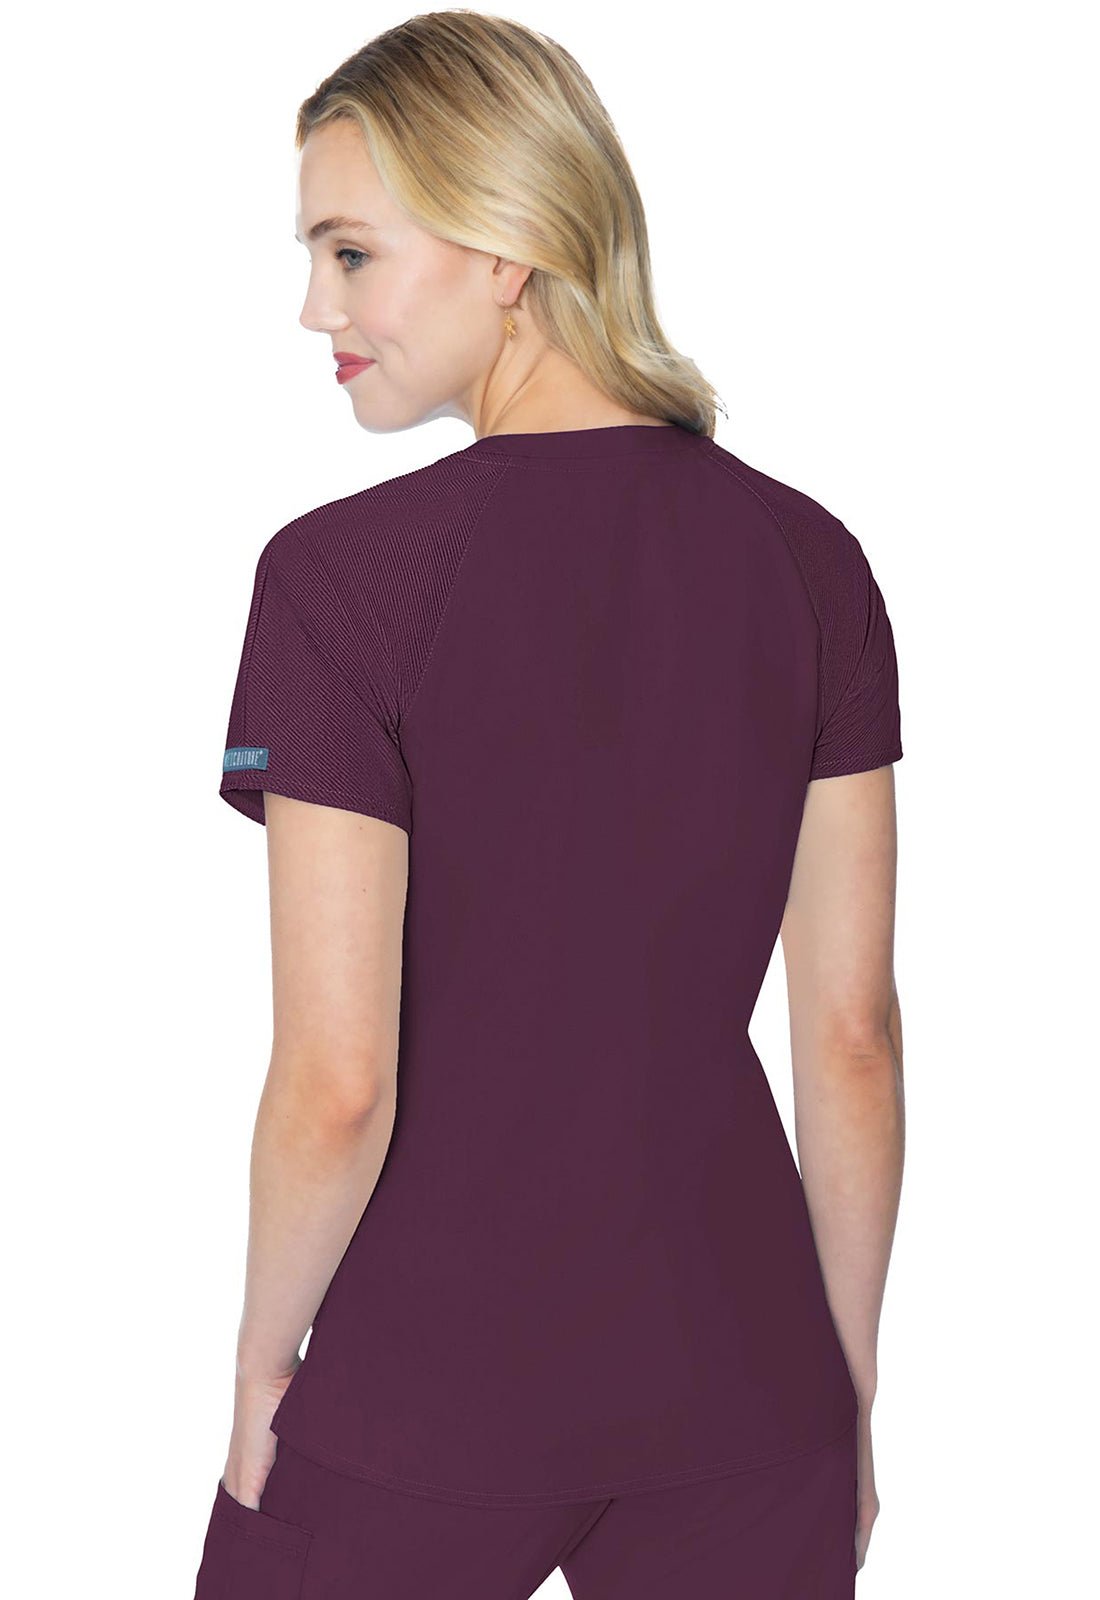 Med Couture Touch V Neck Scrub Top MC7425 in Black, Ciel, Navy, Pewter, Royal, Wine - Scrubs Select